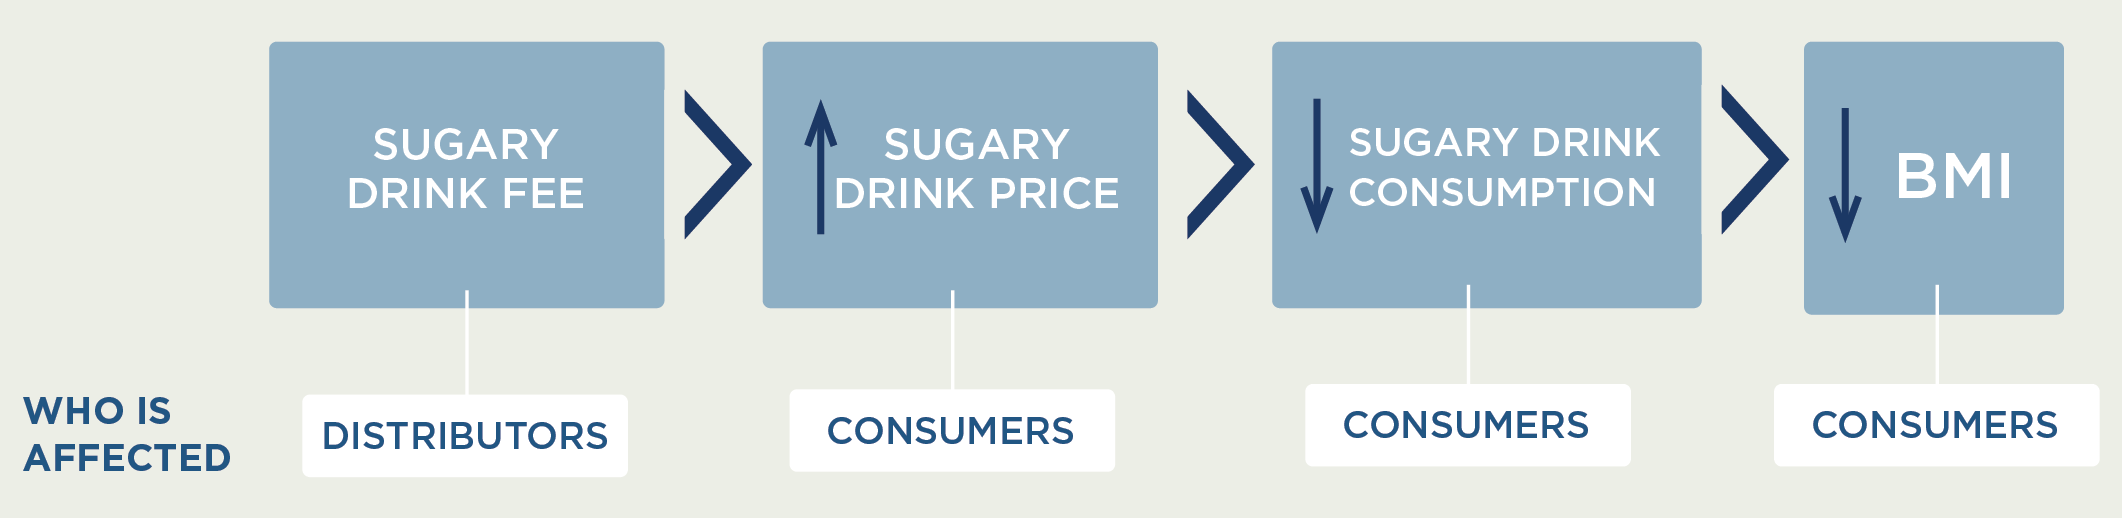 Logic model: Sugary drink fee - Distributors are affected. Leads to an increase in sugary drink price, and consumers are affected. This leads to a decrease in sugary drink consumption, and consumers are affected. This finally leads to a decrease in BMI, and consumers are affected.